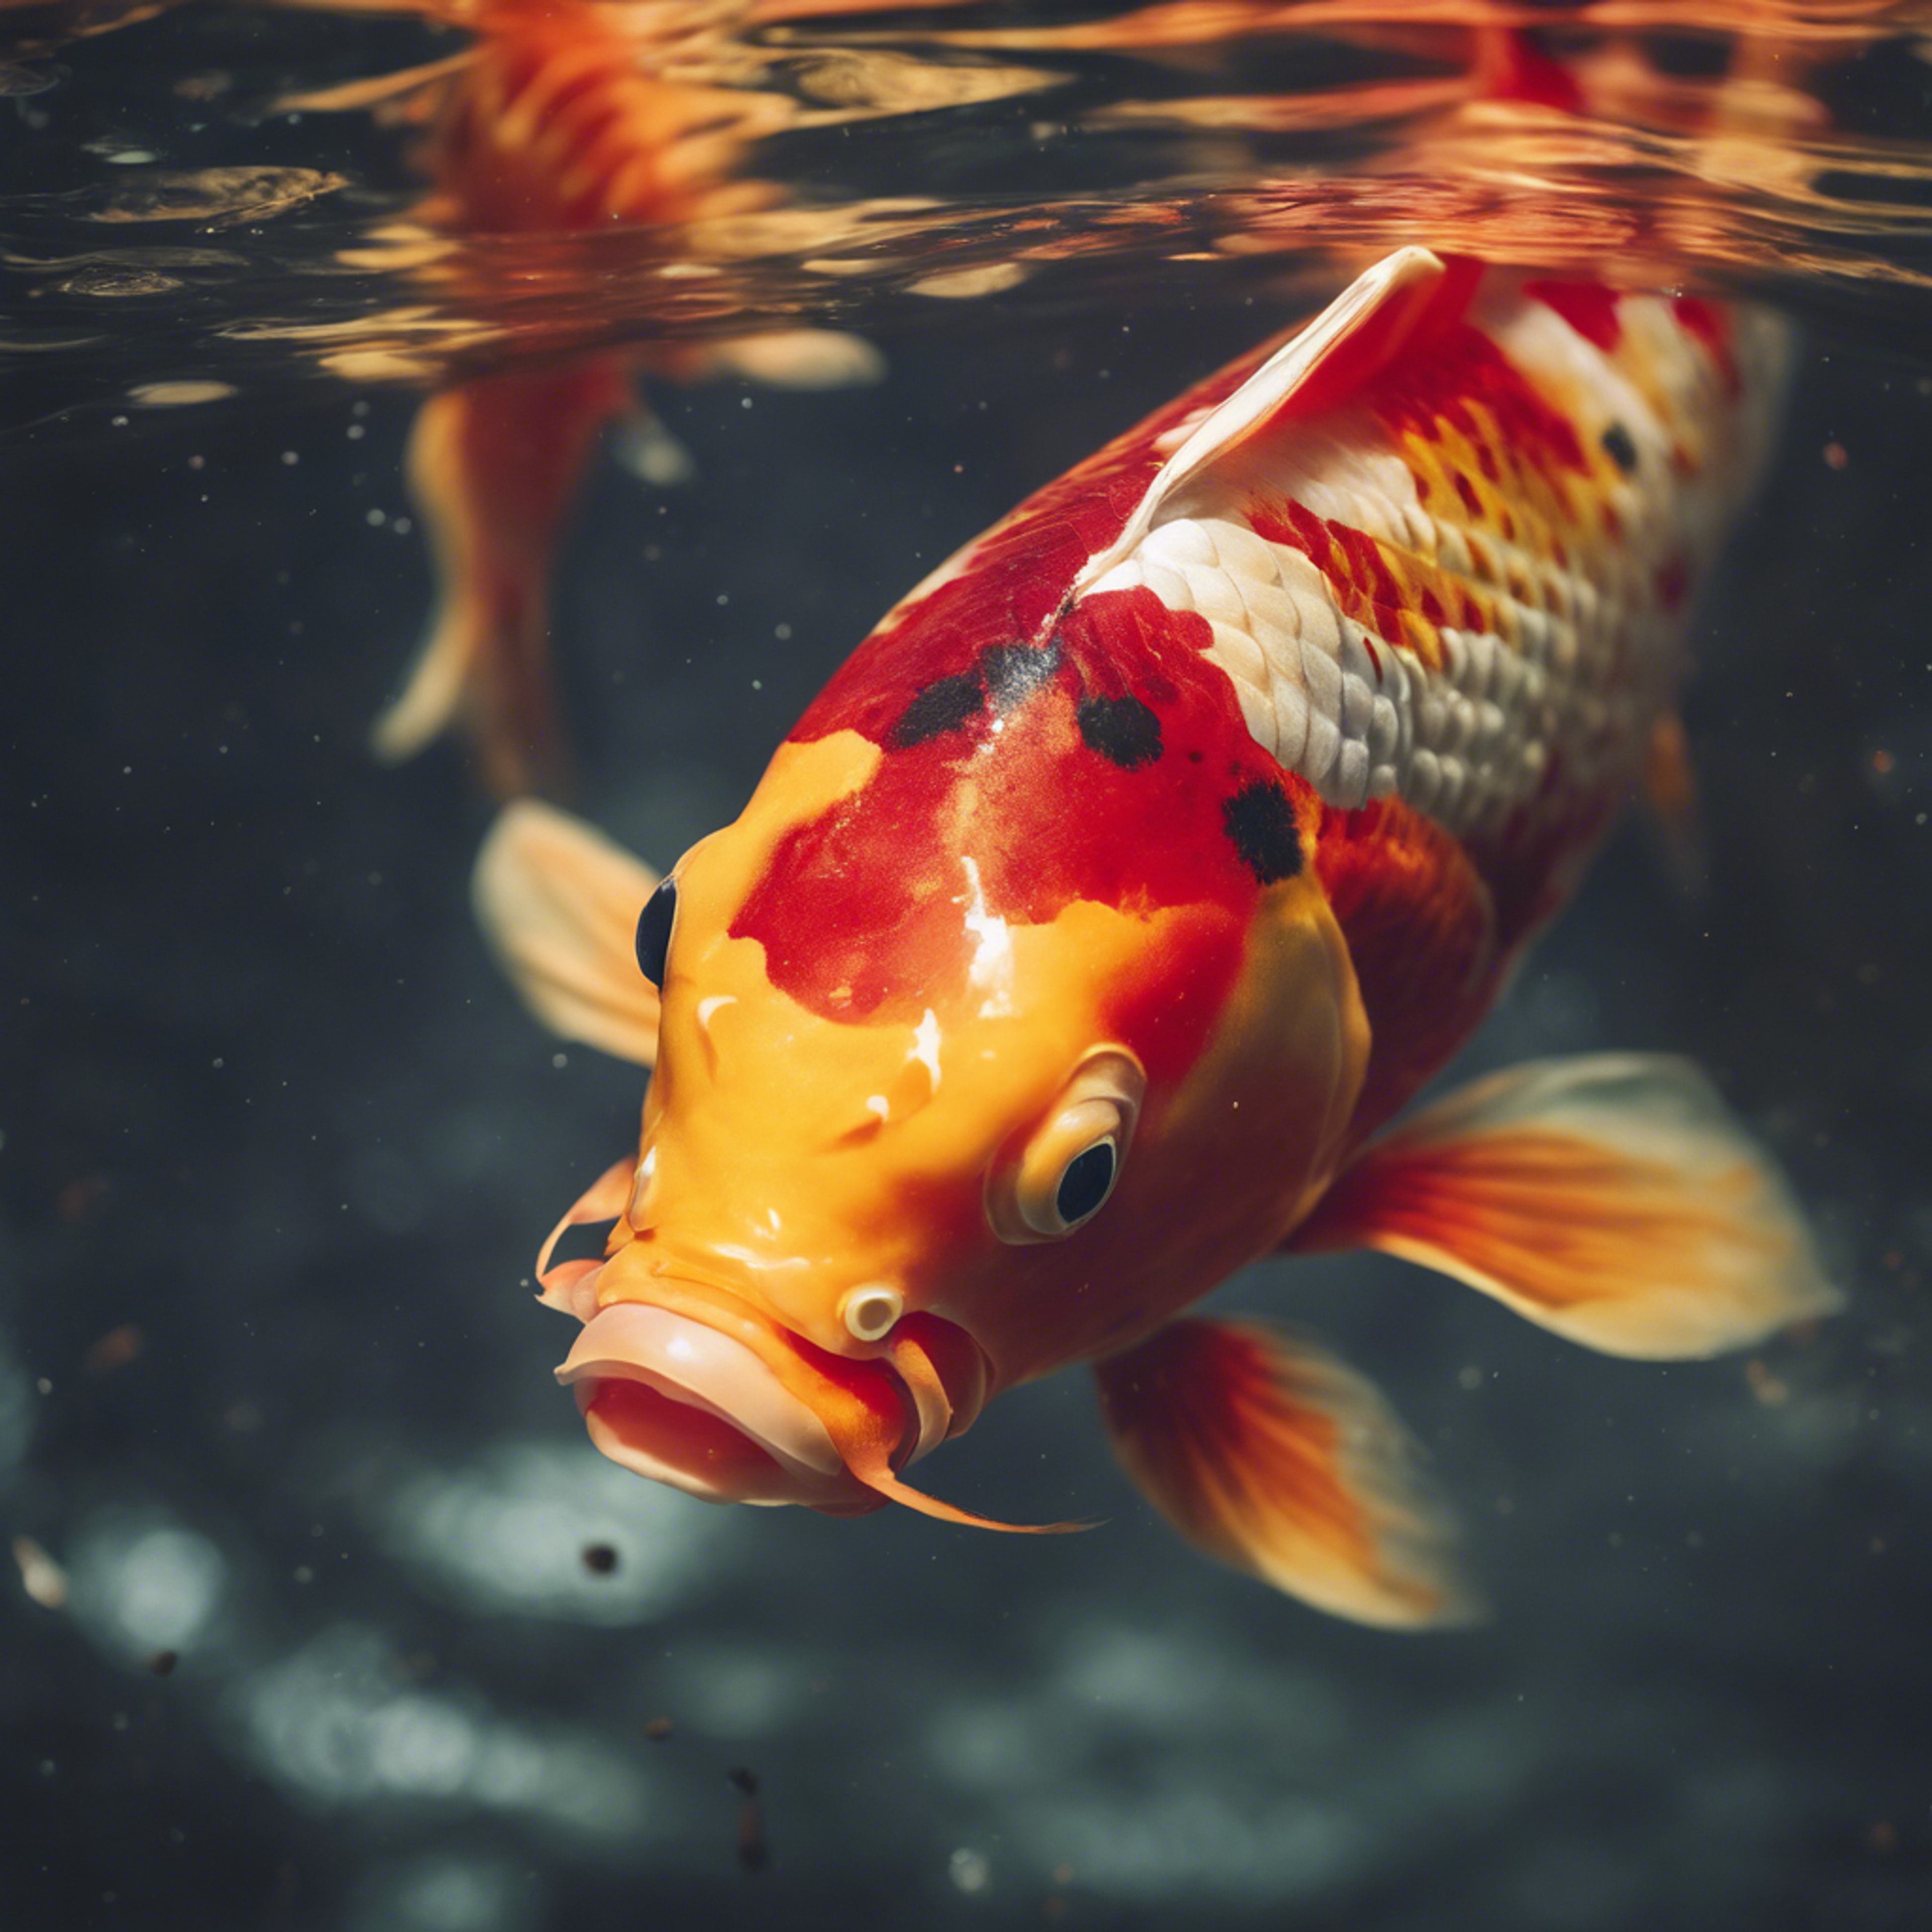 A vibrant red and gold koi fish swimming in a clear pond. Tapeta[1dfeb98f60cb429caecb]